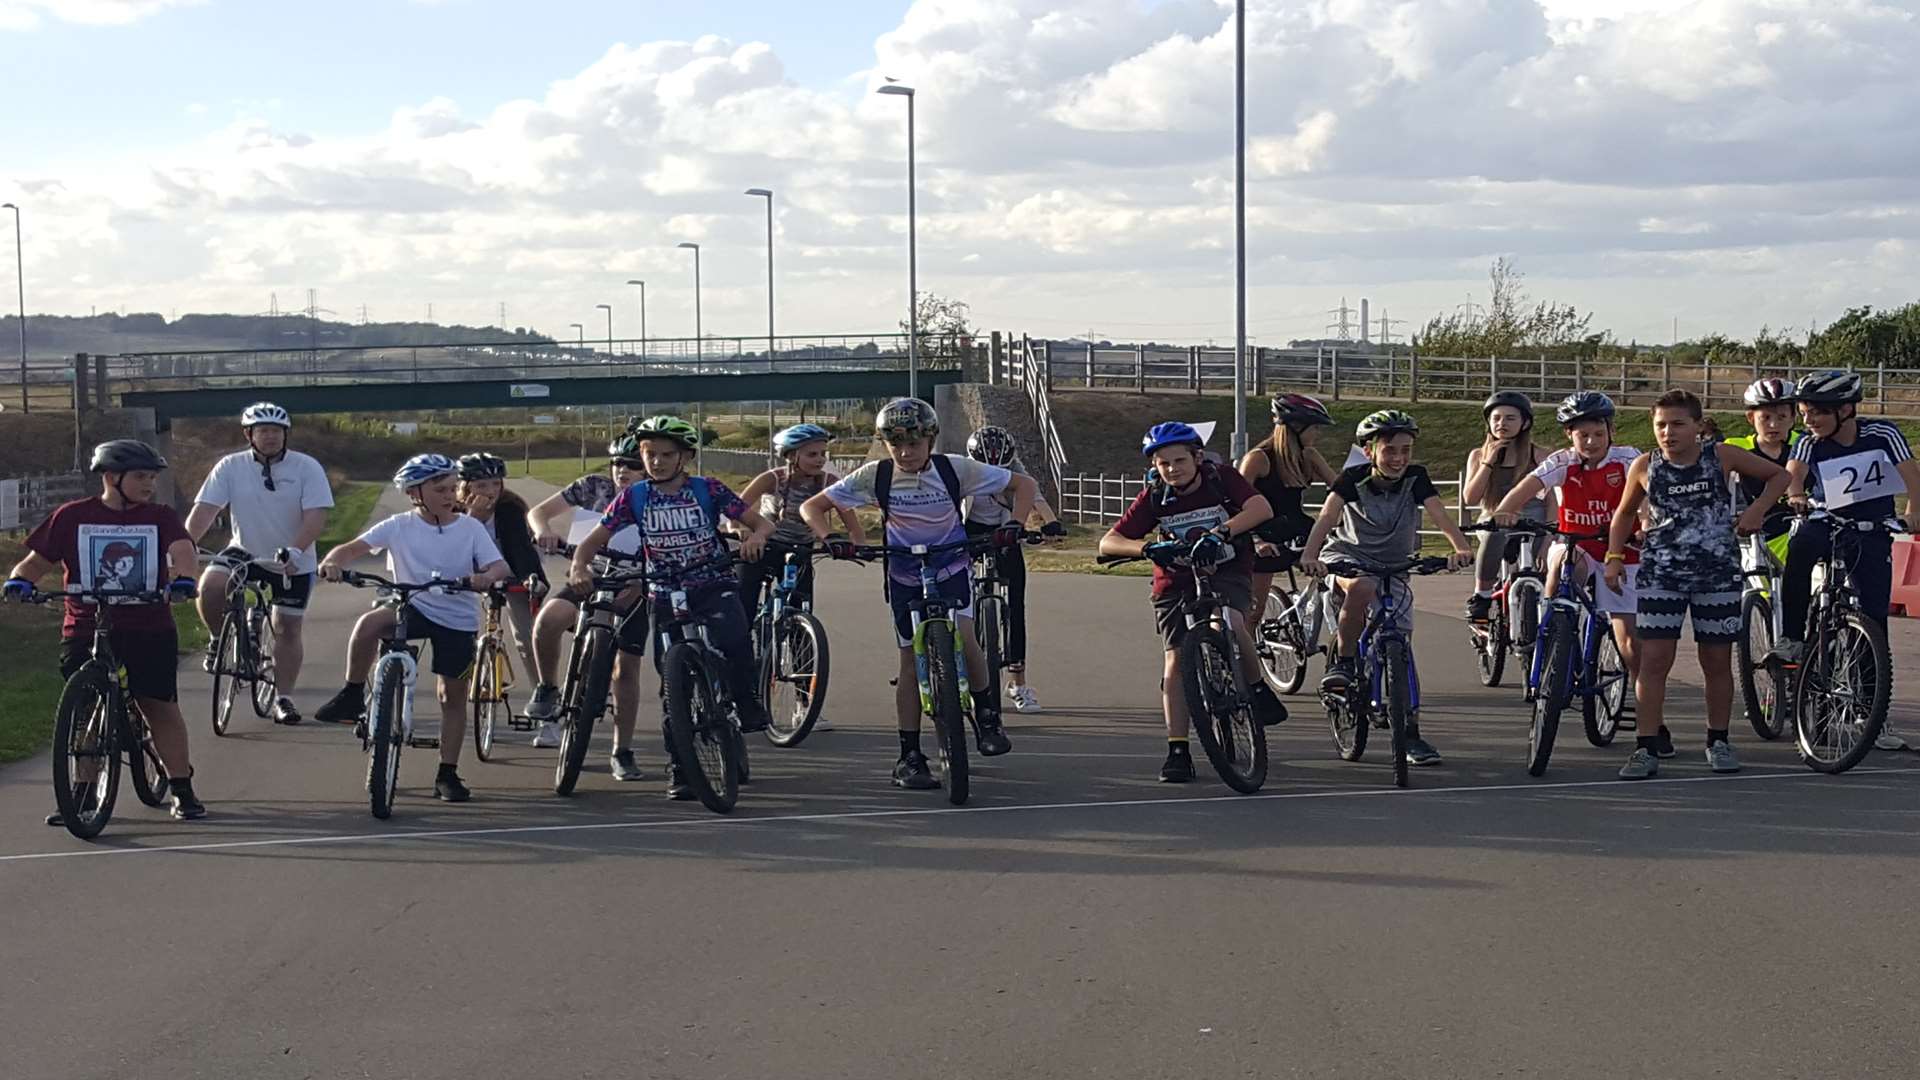 Alex Neat, 12, and friends cycled around Cyclopark to raise money for Jack